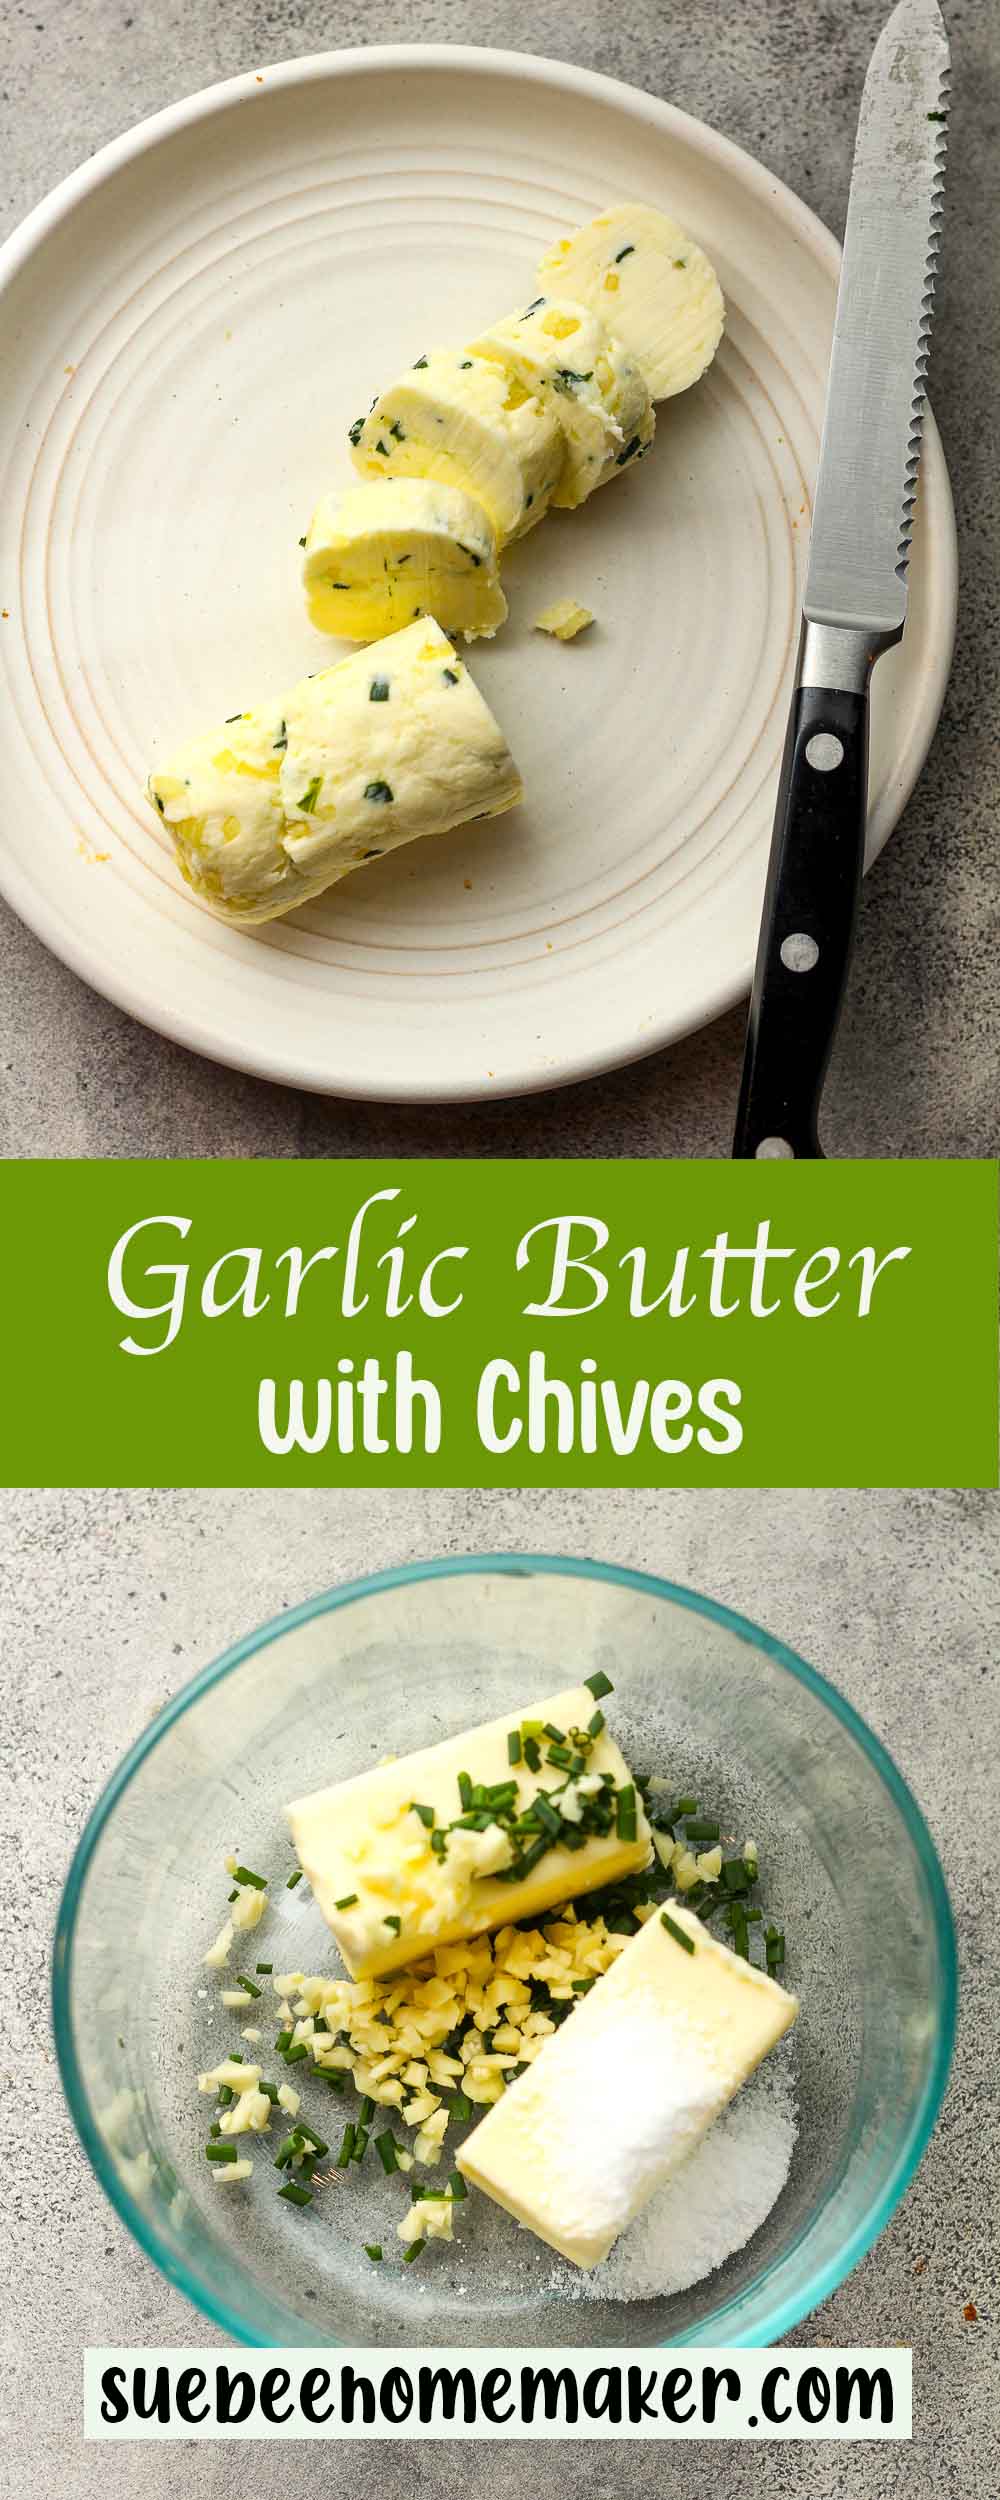 A collage of photos of garlic butter with chives.